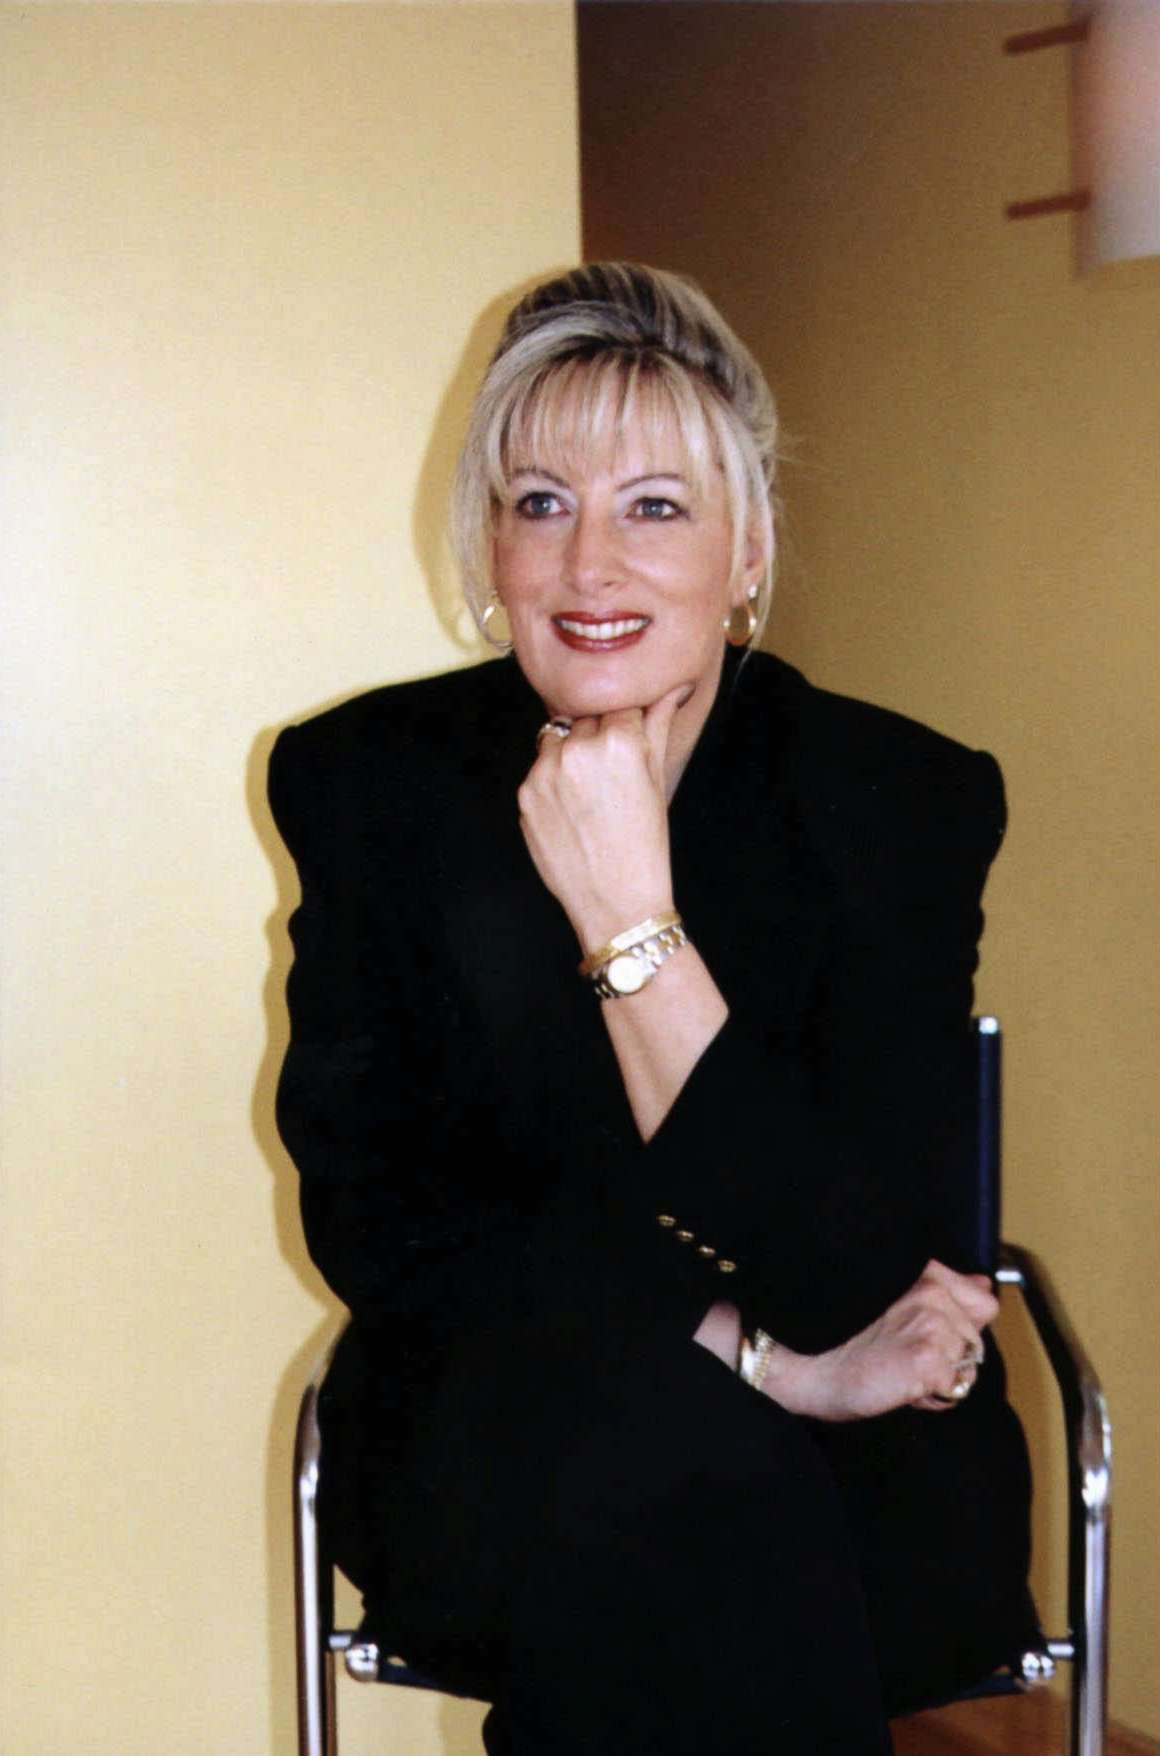 PHOTO: Linda Tripp, is shown in this undated photo released by her attorney's office, March 16, 1998.